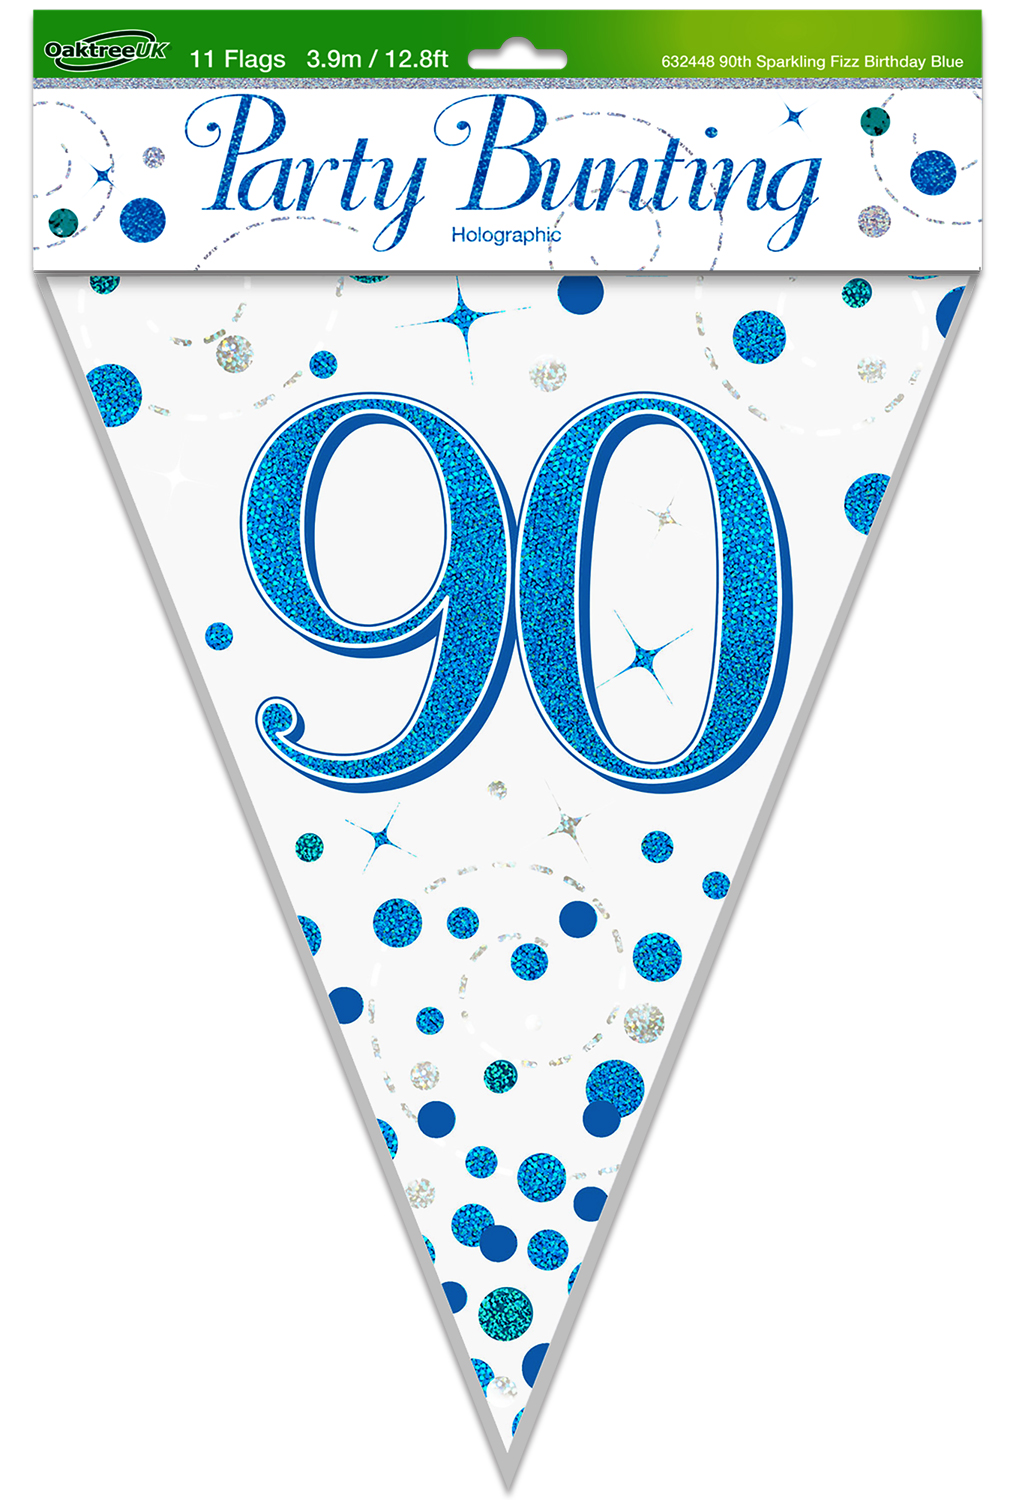 Party Bunting 90th Sparkling Fizz Birthday Blue Holographic 11